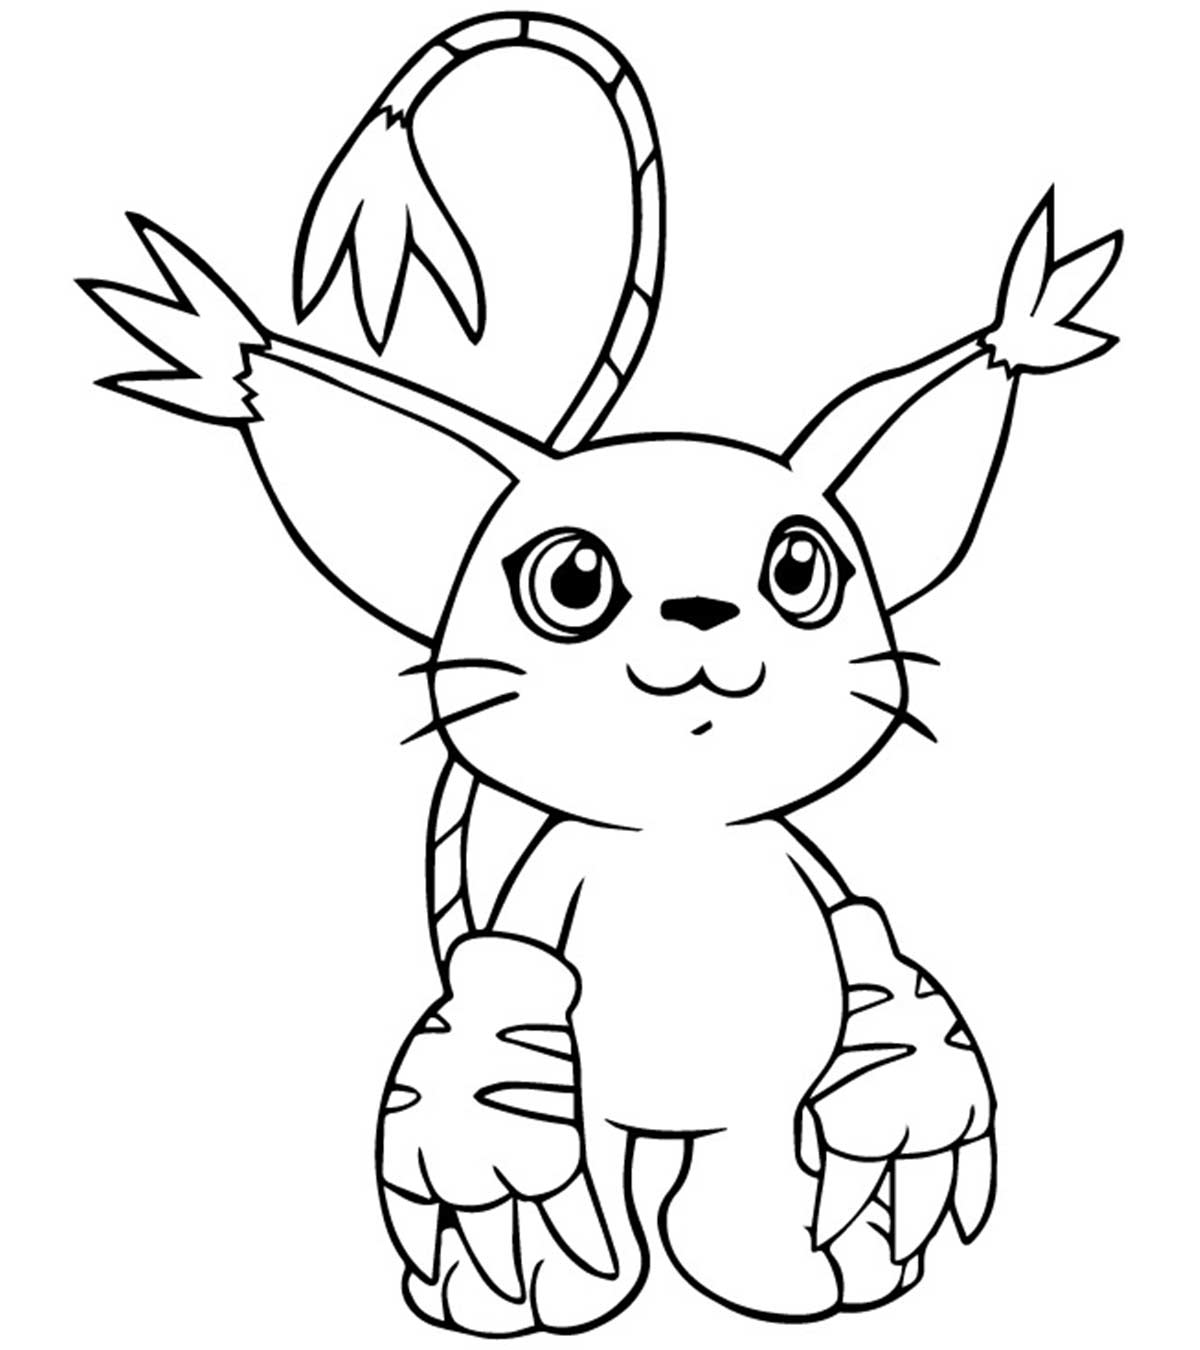 10 Lovely Digimon Coloring Pages For Your Little Ones